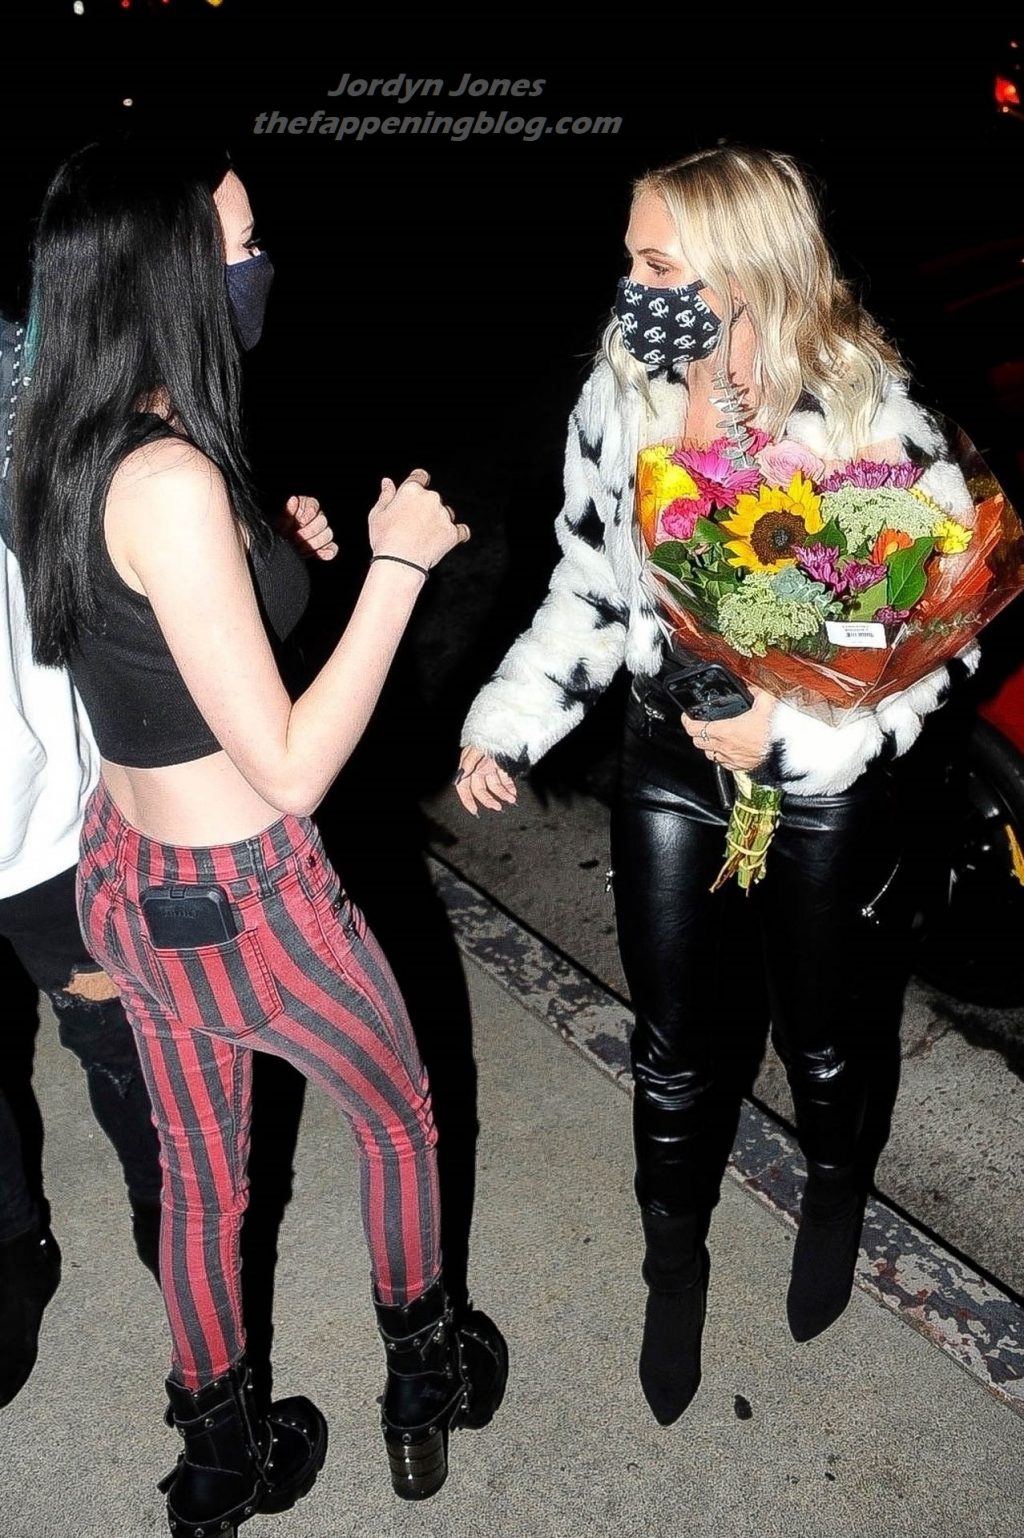 Jordyn Jones Gets Showered by Fan Love and is Gifted Flowers Outside BOA Steakhouse (39 Photos)